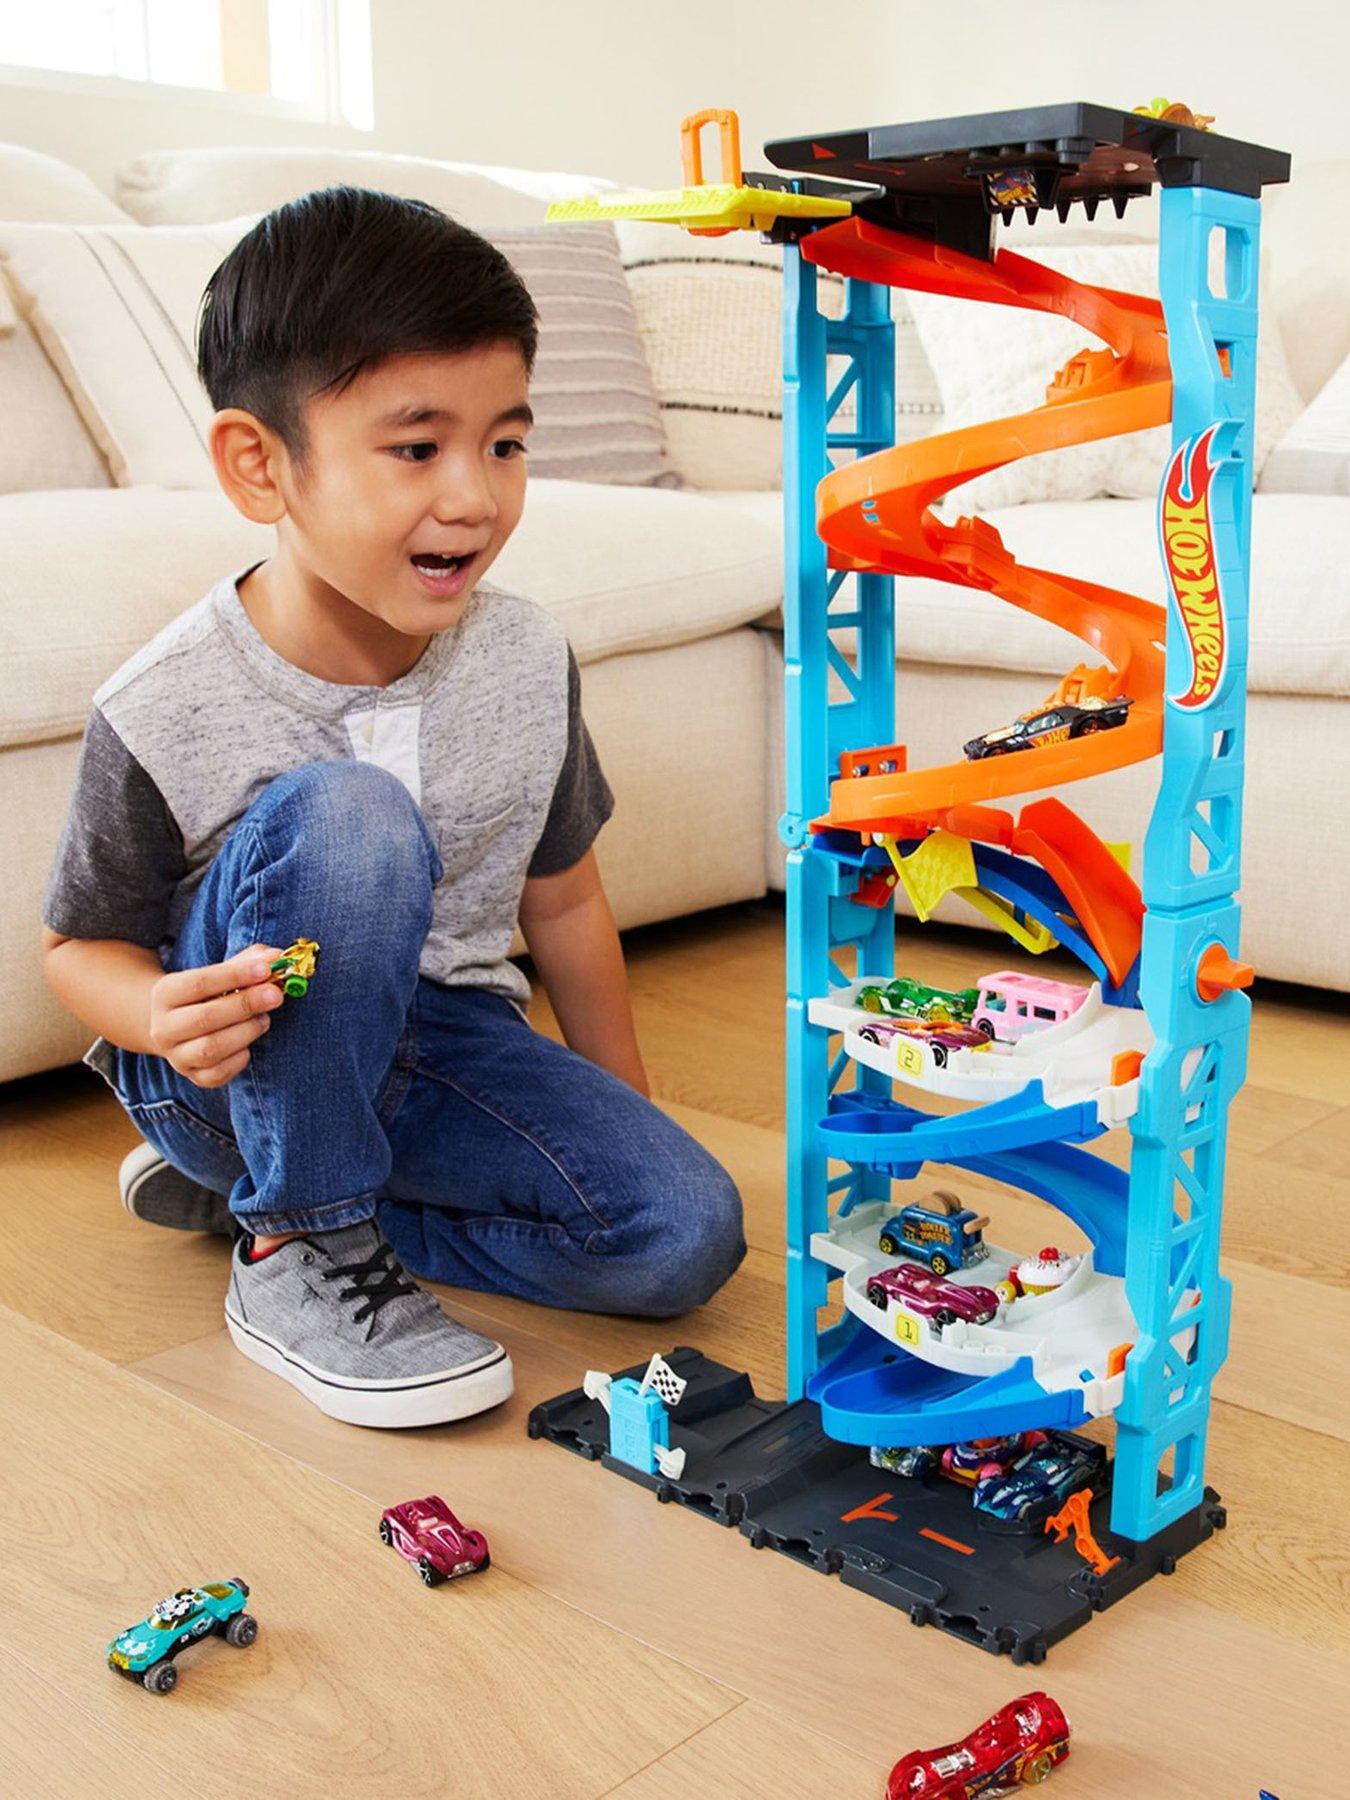 Hot Wheels Track Set, Gator Pizza Place & 1 Toy Car